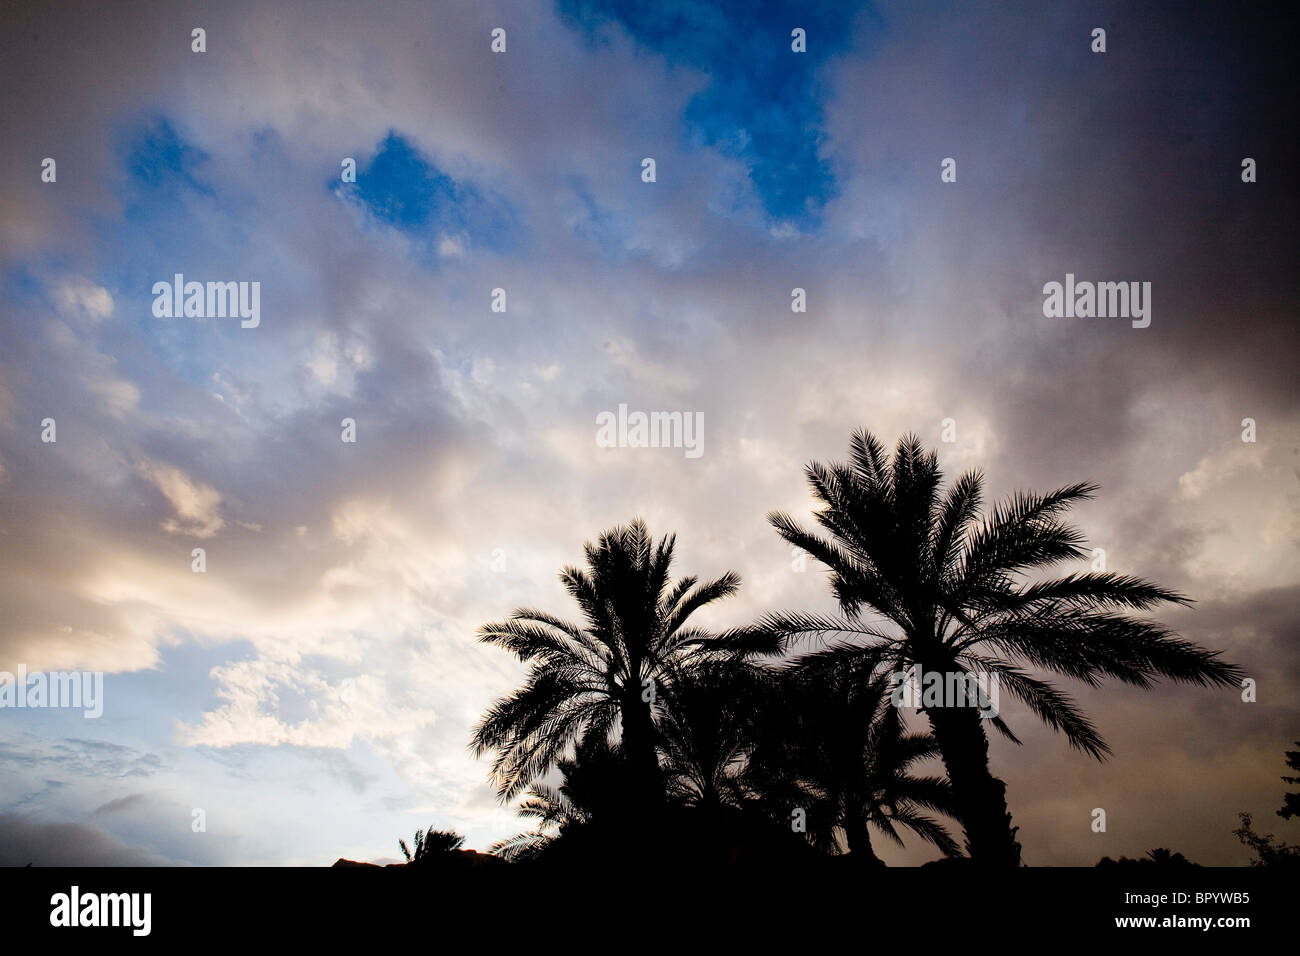 Photograph of the twilight skies over the palm trees in the Judean Desert Stock Photo